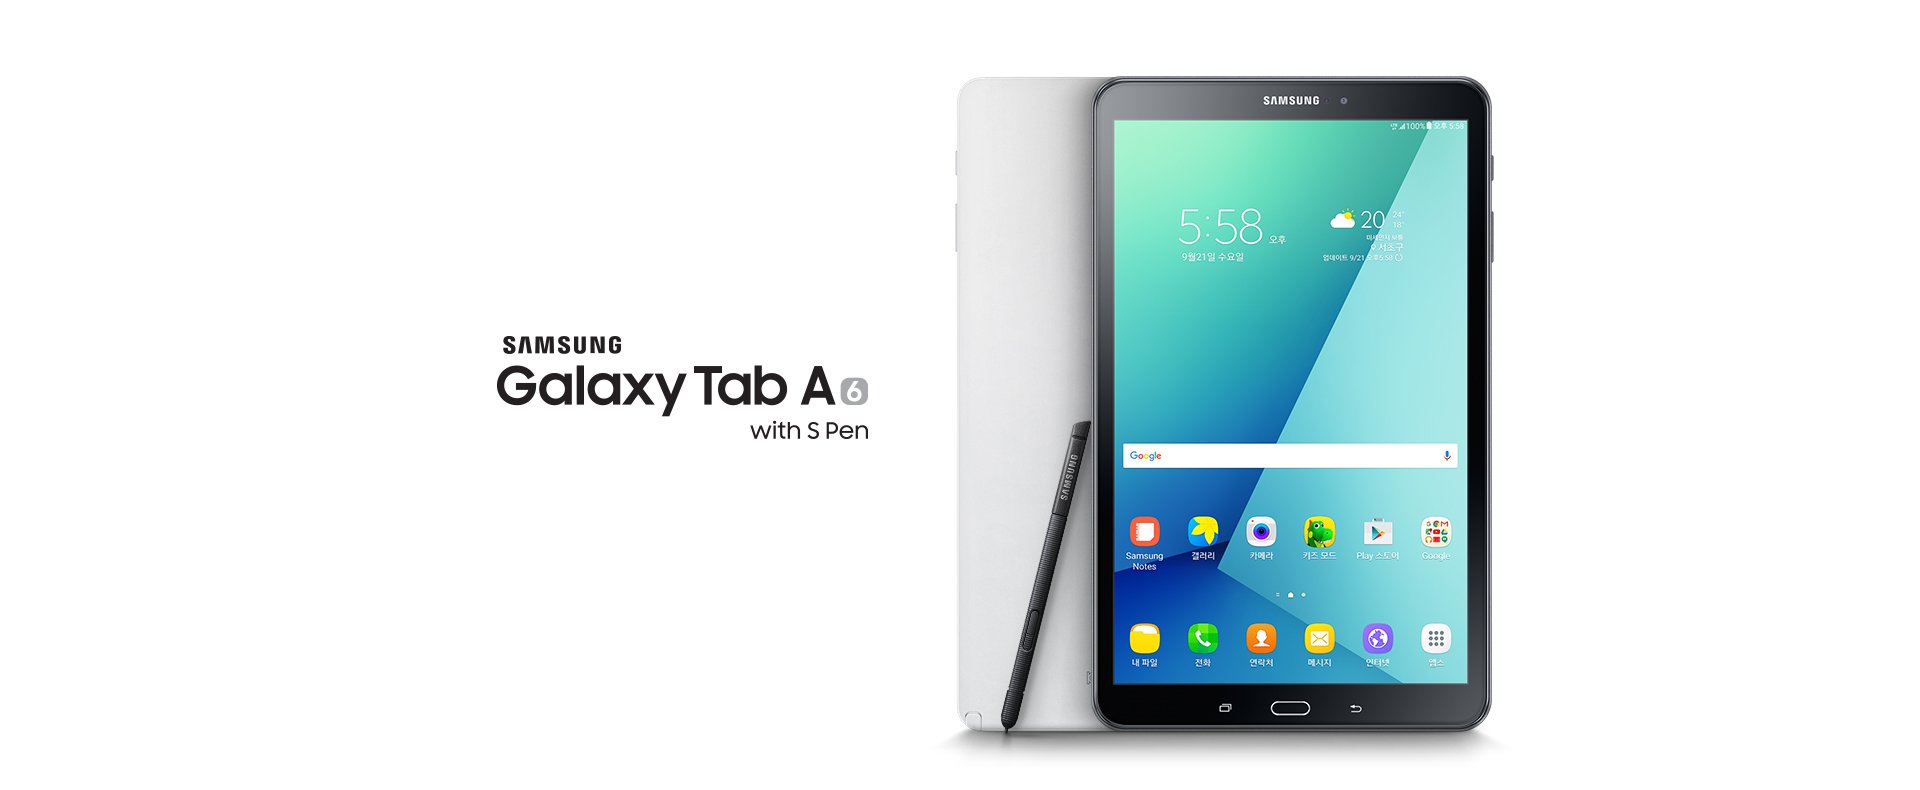 Landschap Vakantie Seminarie Galaxy Tab A (2016) with S Pen officially launched - SamMobile - SamMobile